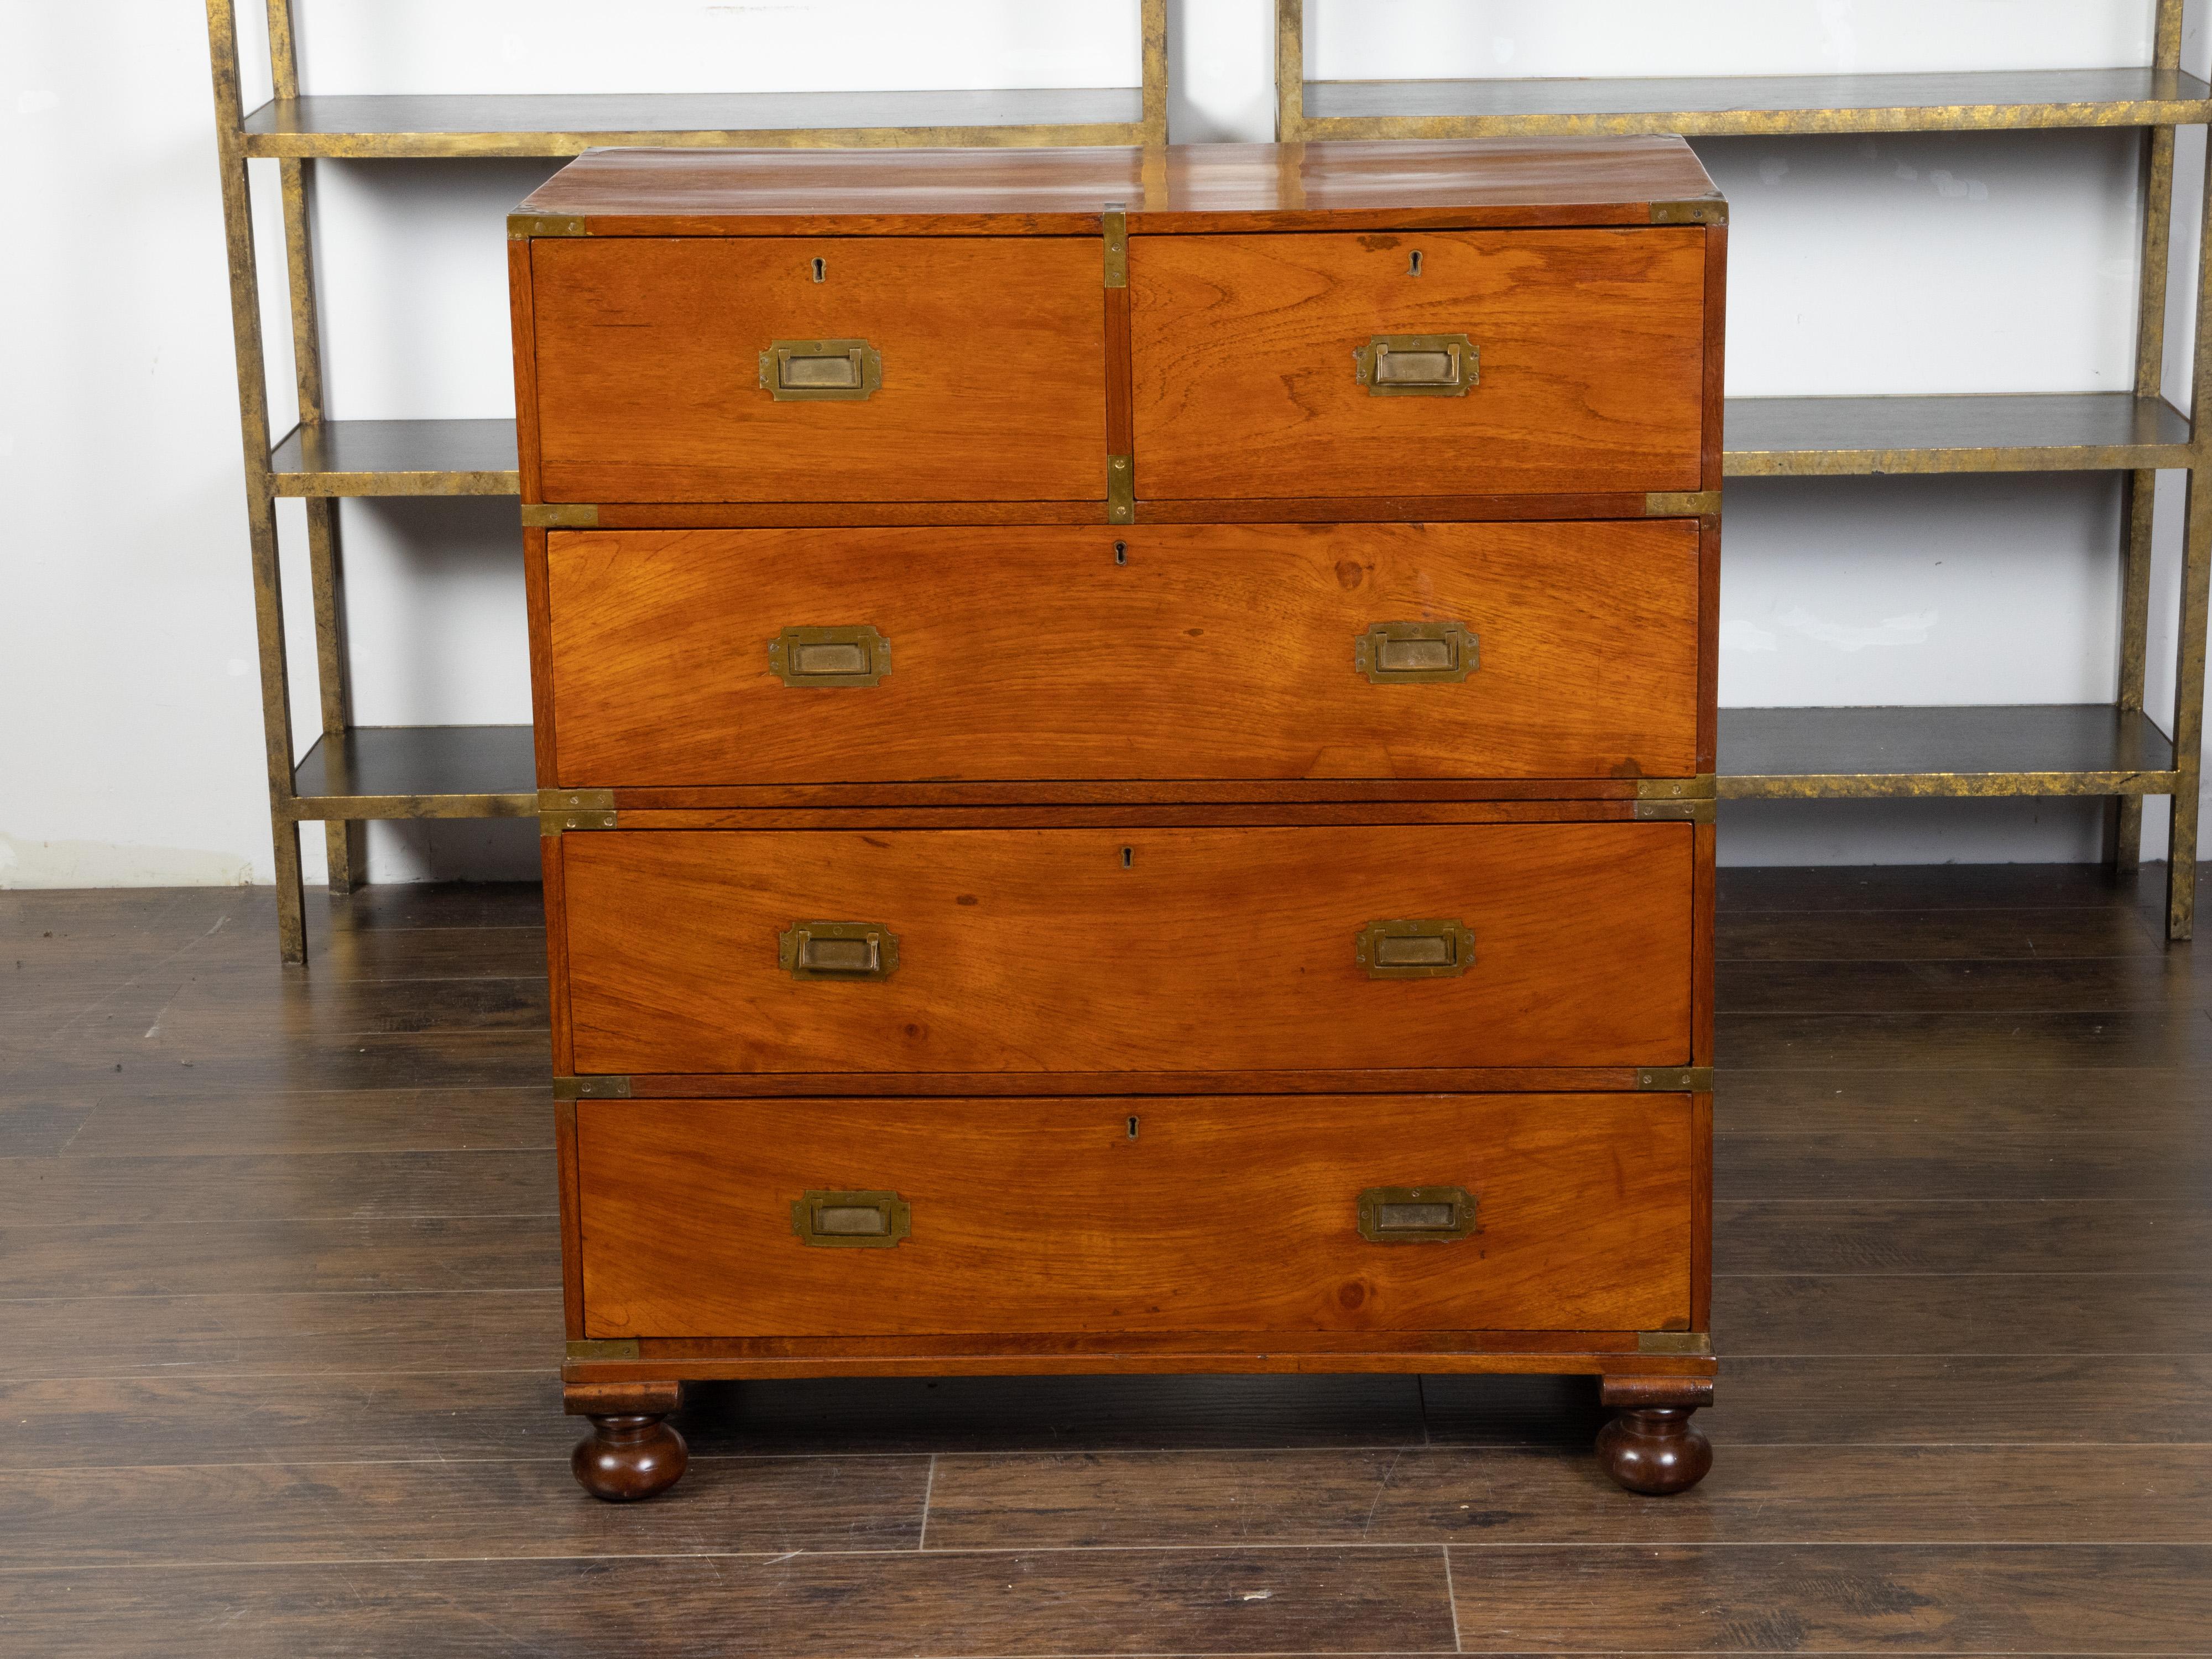 An English mahogany campaign chest from the mid 19th century, with five drawers and brass hardware. Created in England during the second quarter of the 19th century, this mahogany campaign chest is made of two parts flanked with lateral handles to